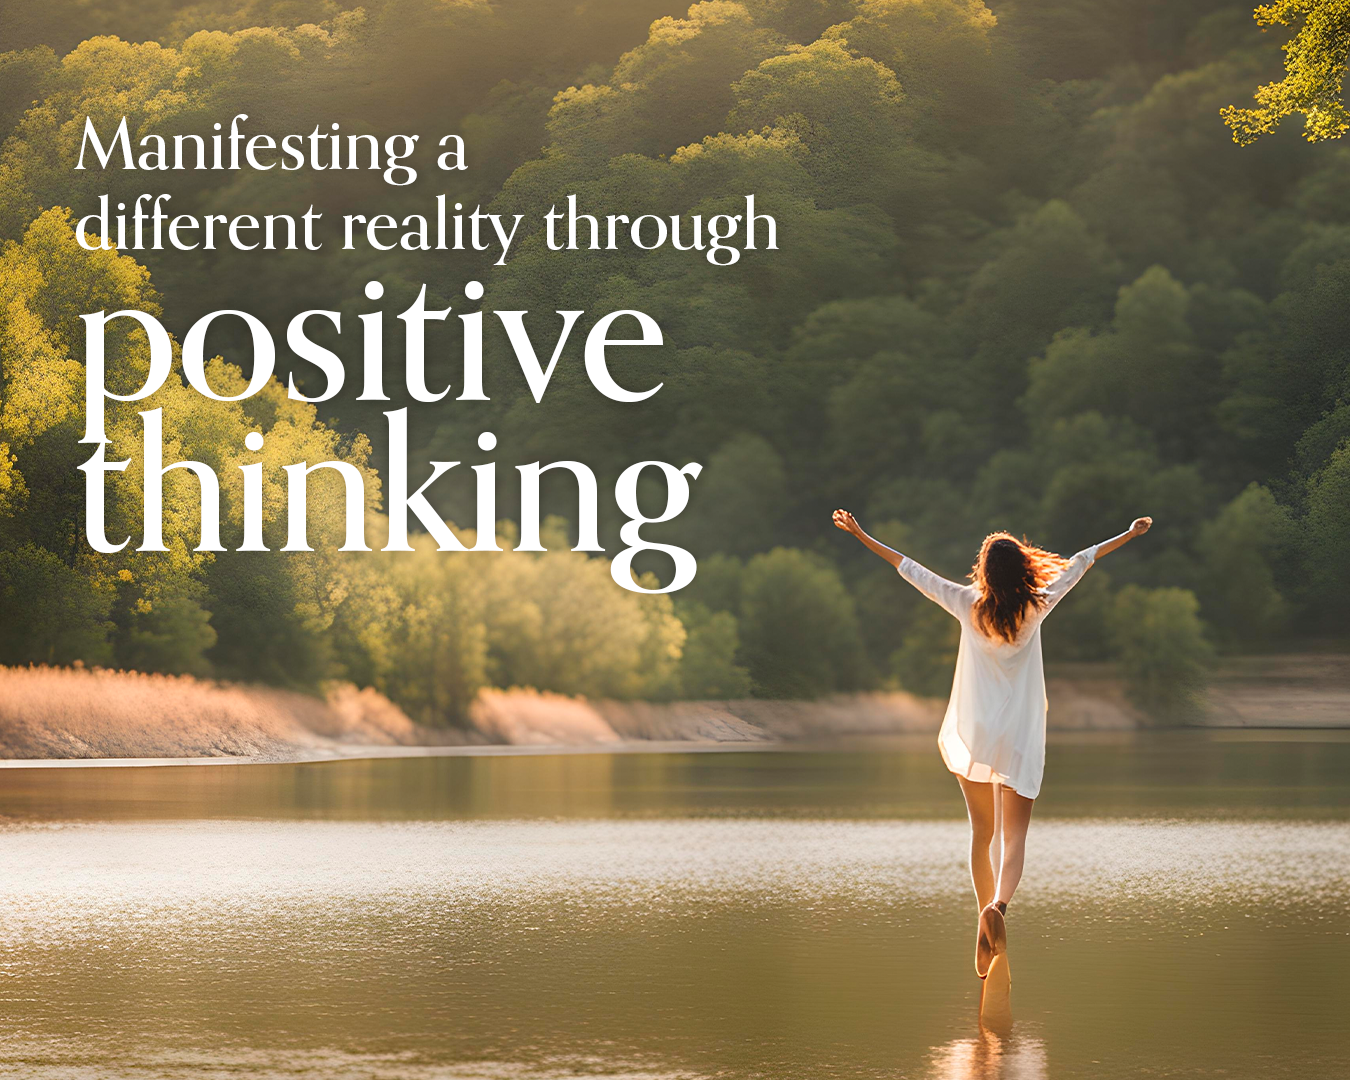 Manifestation and the mind: How positive thinking can rewire your brain